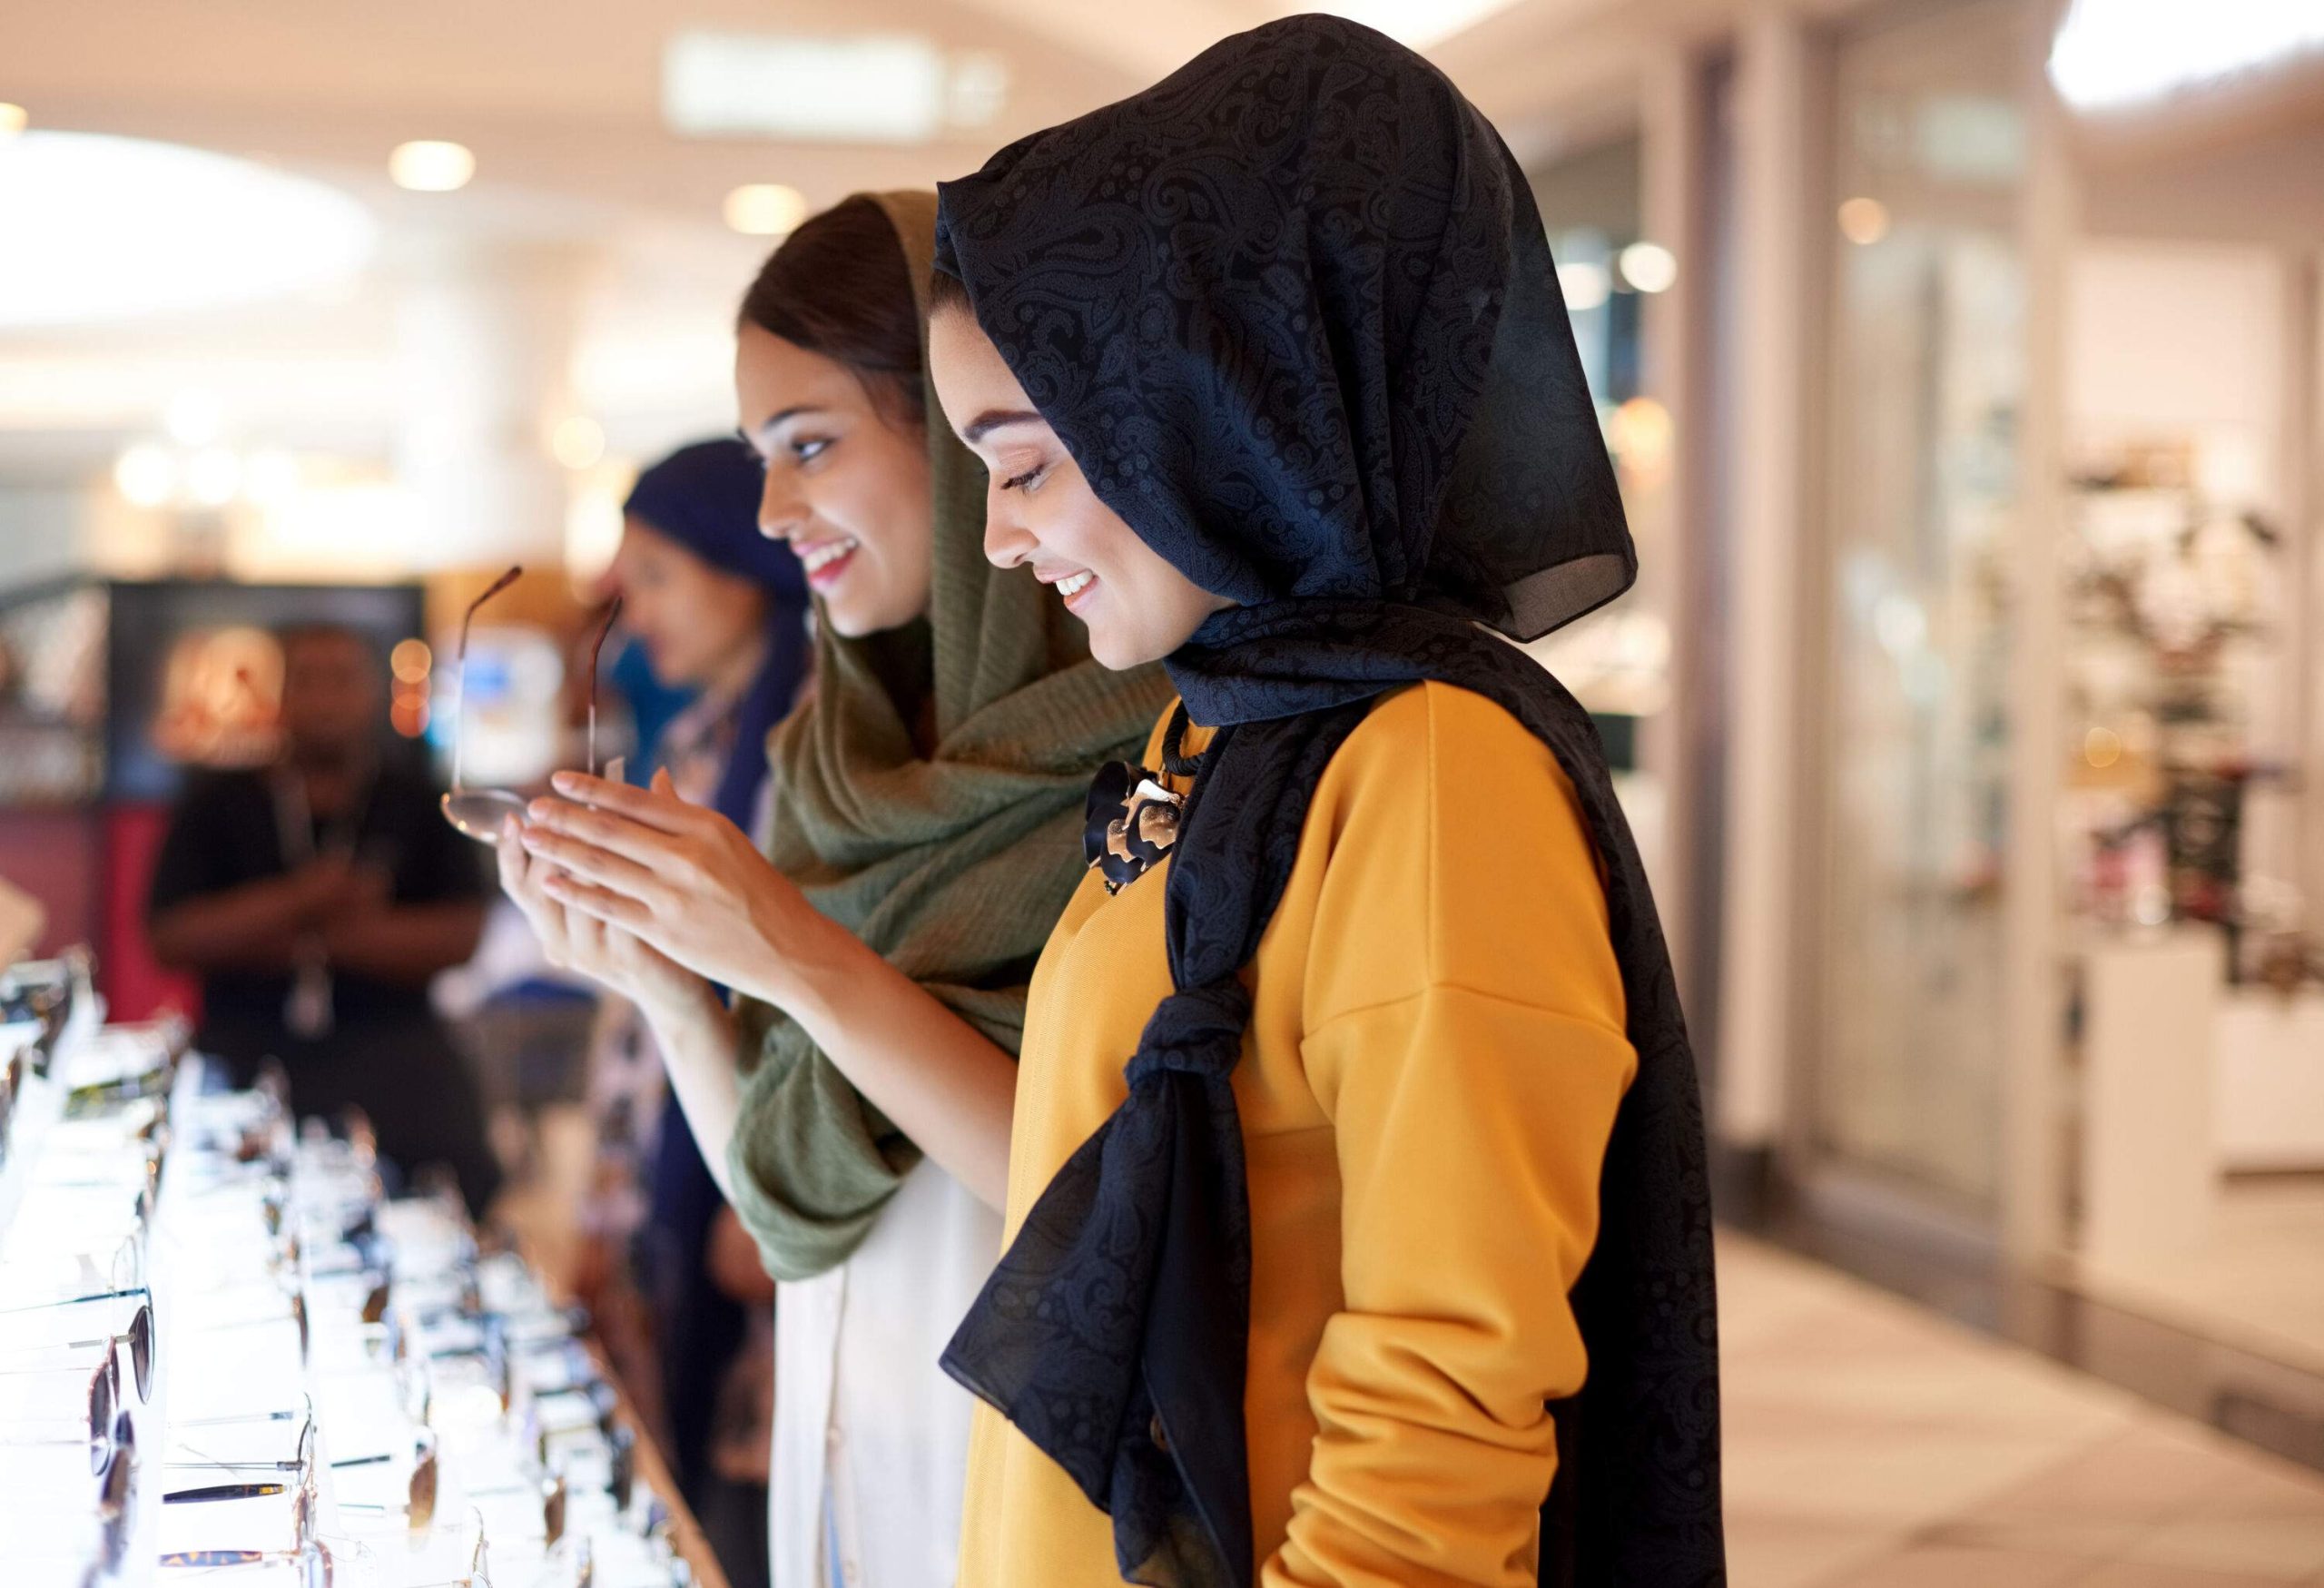 Young women wearing head coverings checking out a display of sunglasses.